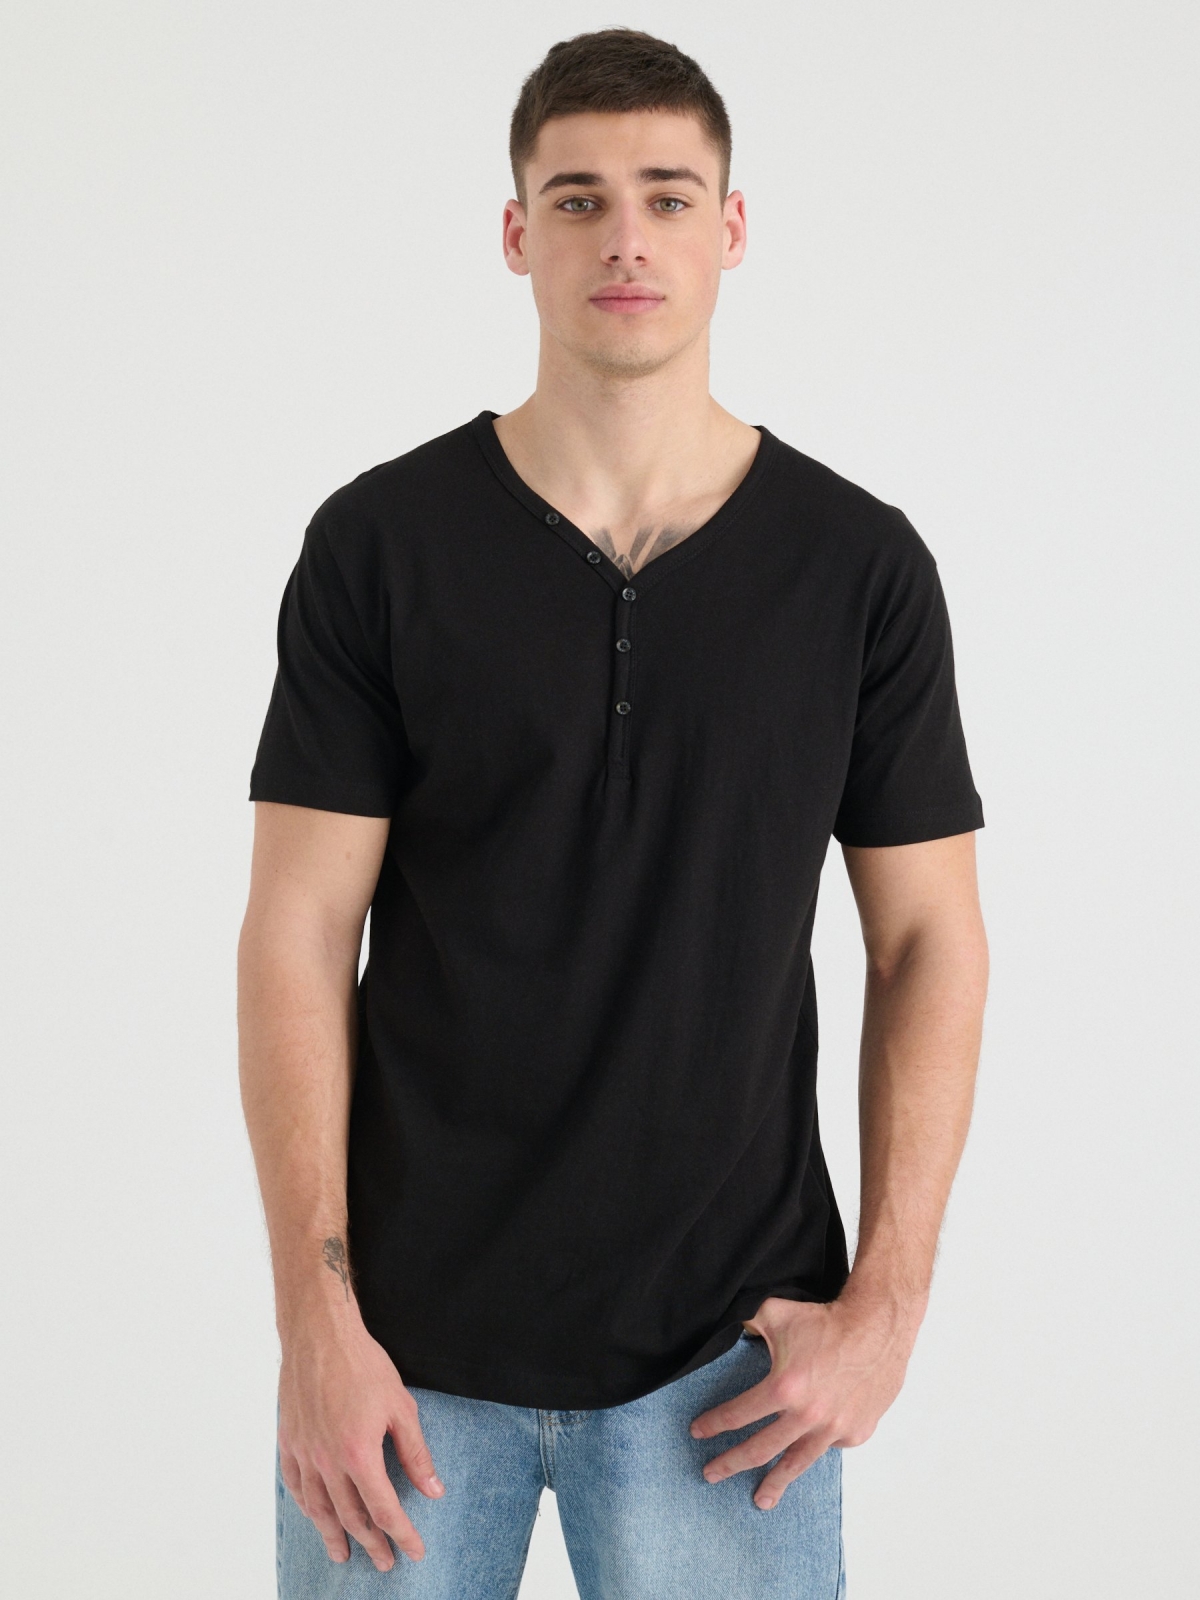 Buttons neck t-shirt black middle front view